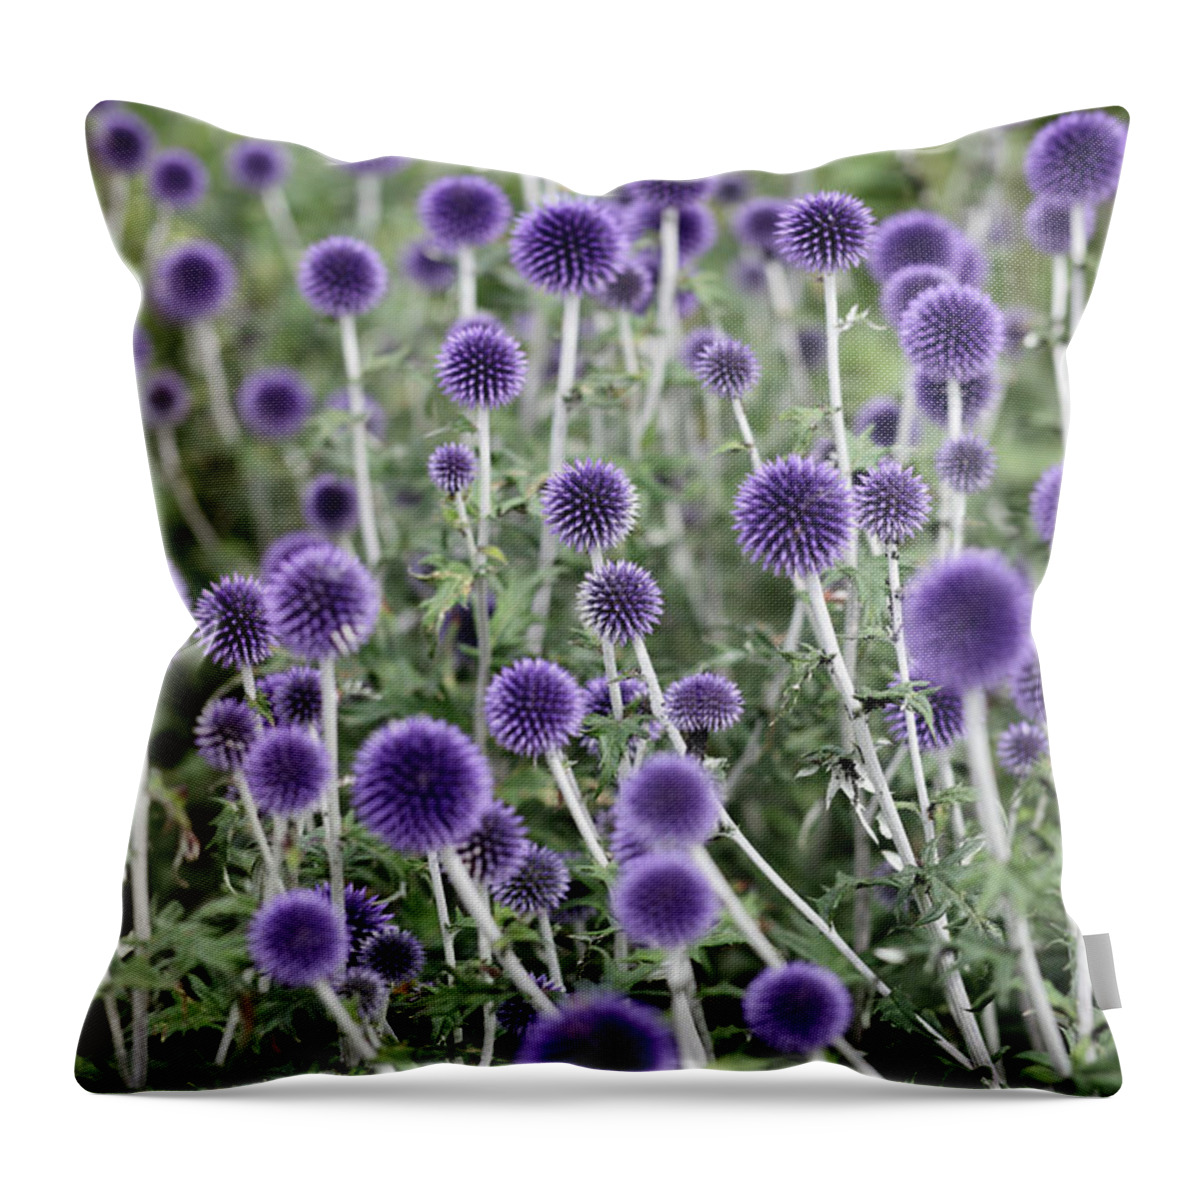 Flowerbed Throw Pillow featuring the photograph Globe Thistle Flowers by Secablue